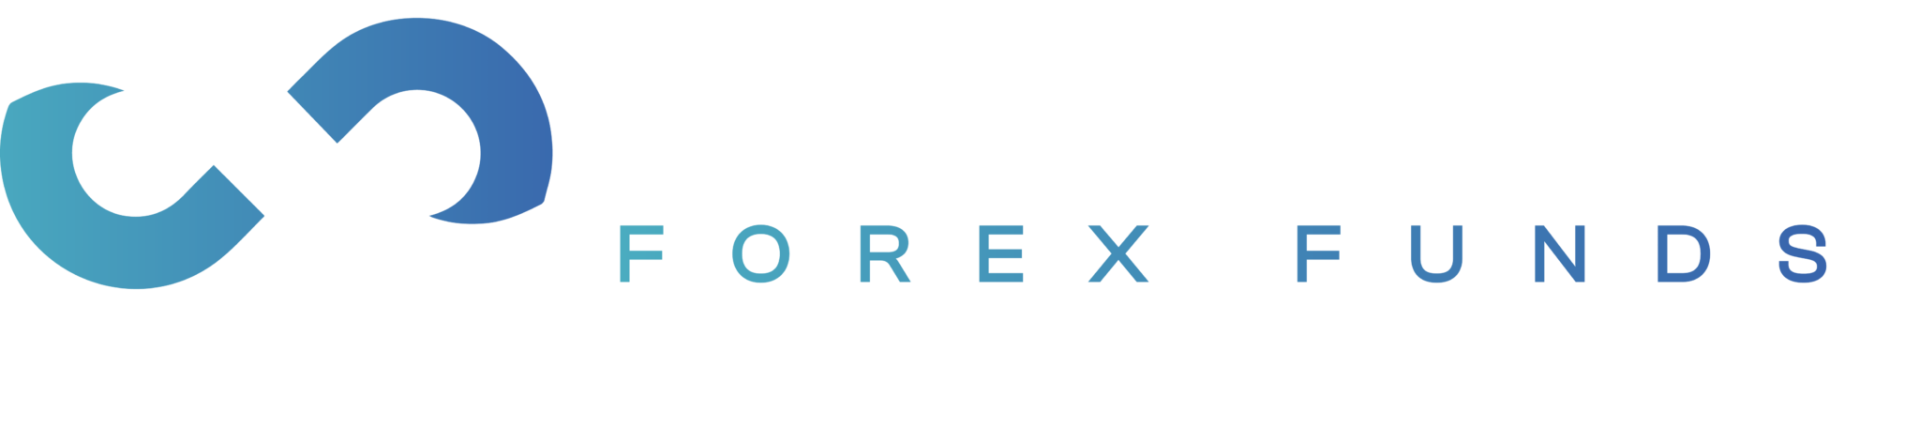 infinity forex funds guaranteed passing